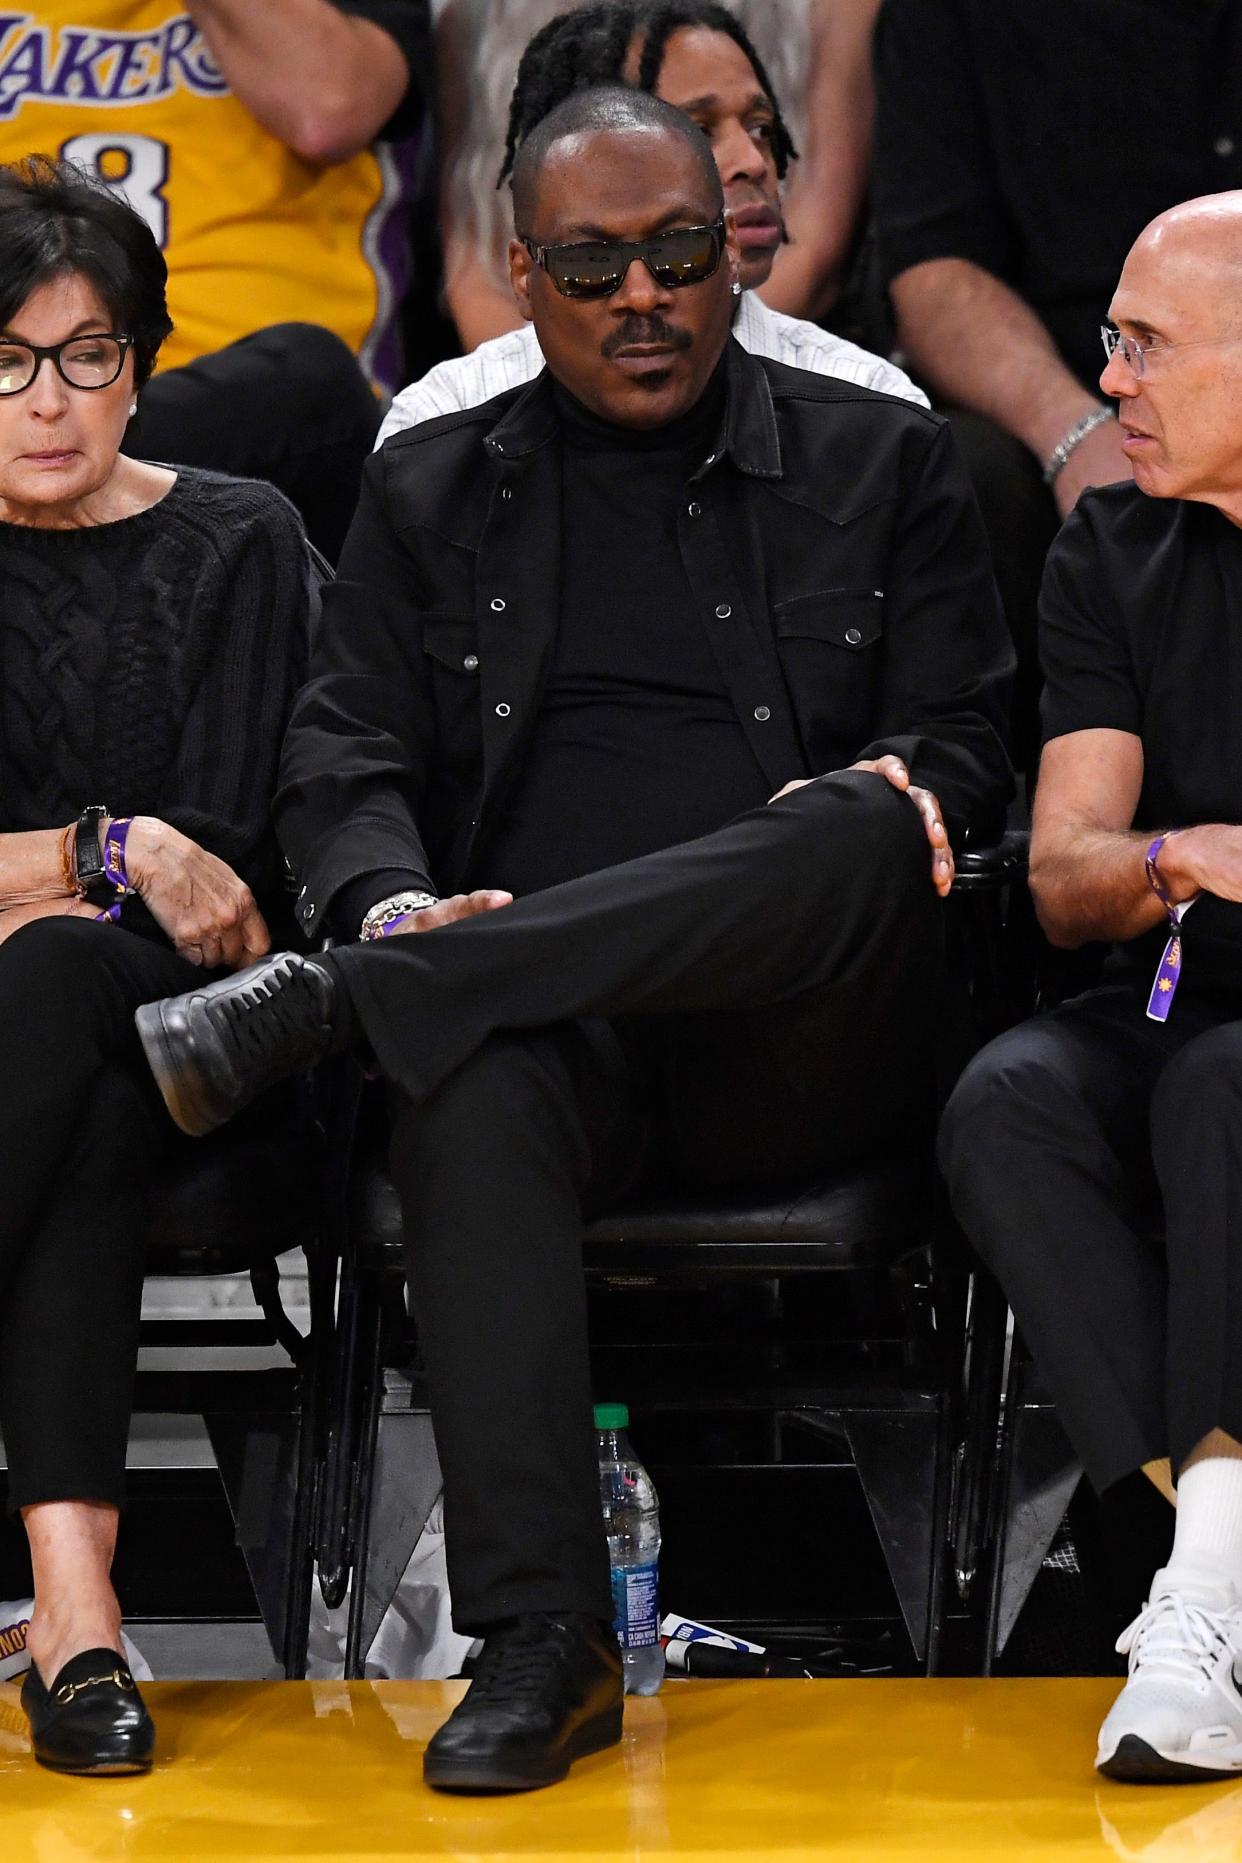 Eddie Murphy attends game three of the Western Conference Finals in May between the Los Angeles Lakers and the Denver Nuggets.